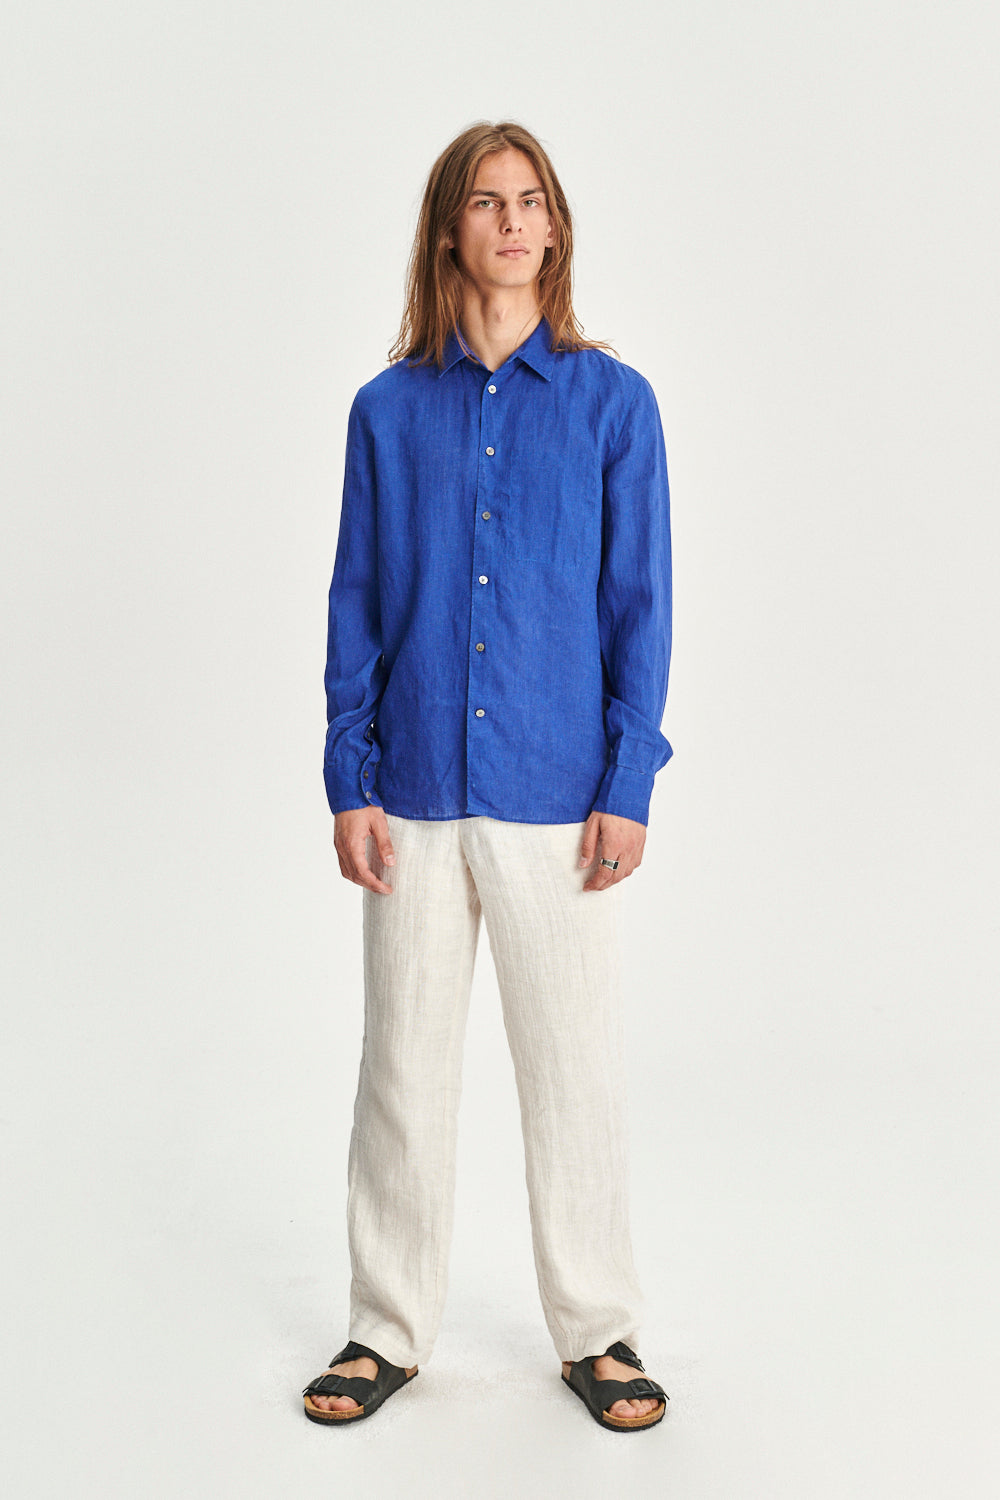 Feel Good  Shirt in a Cobalt Blue and Taupe Double Sided Italian Linen